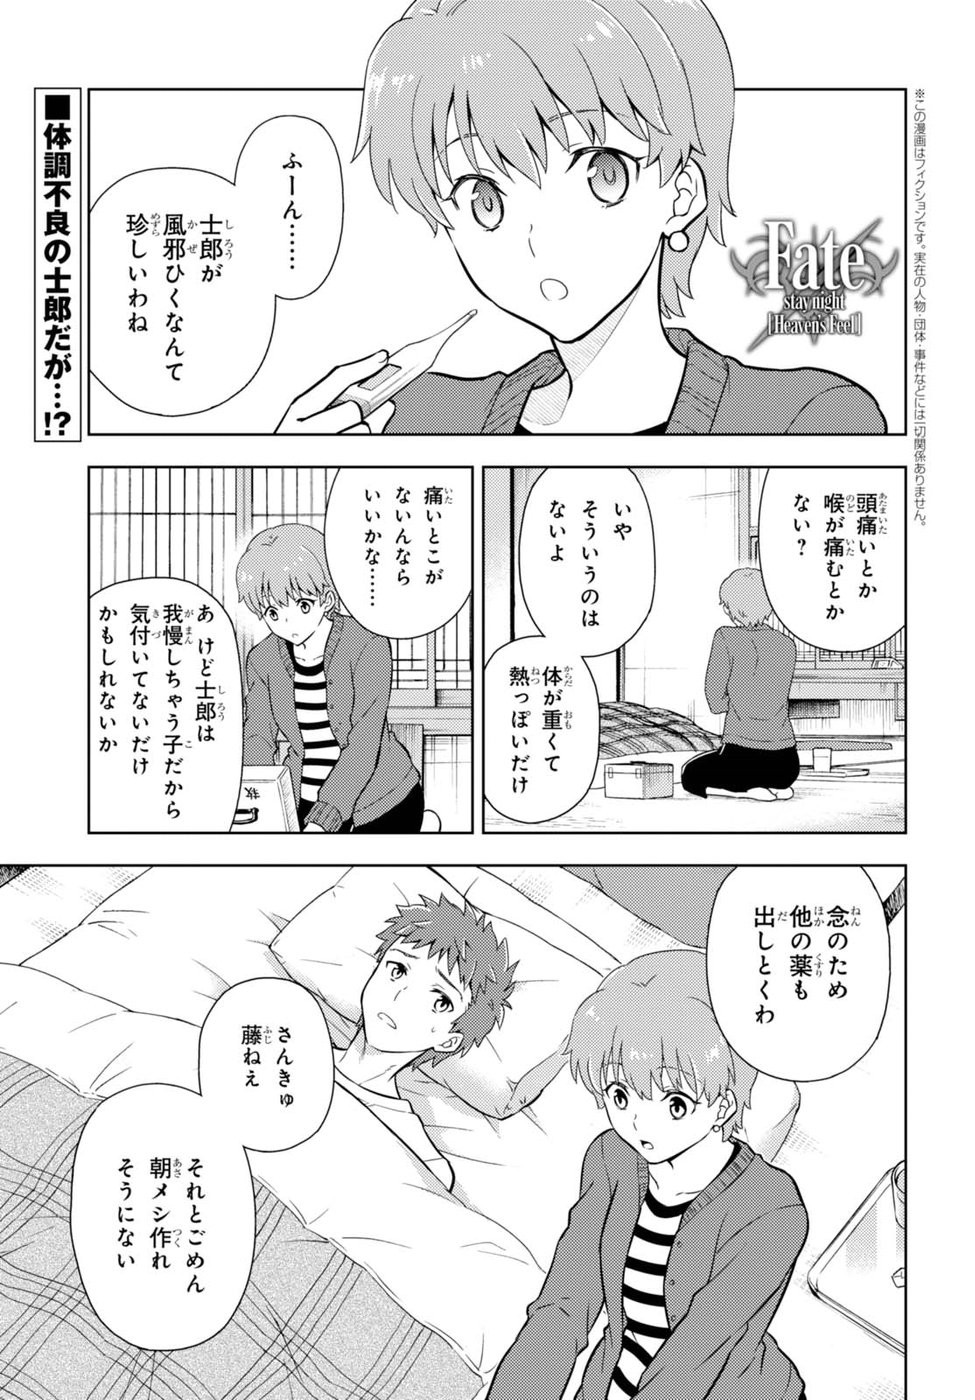 Fate/Stay night Heaven's Feel - Chapter 32 - Page 1